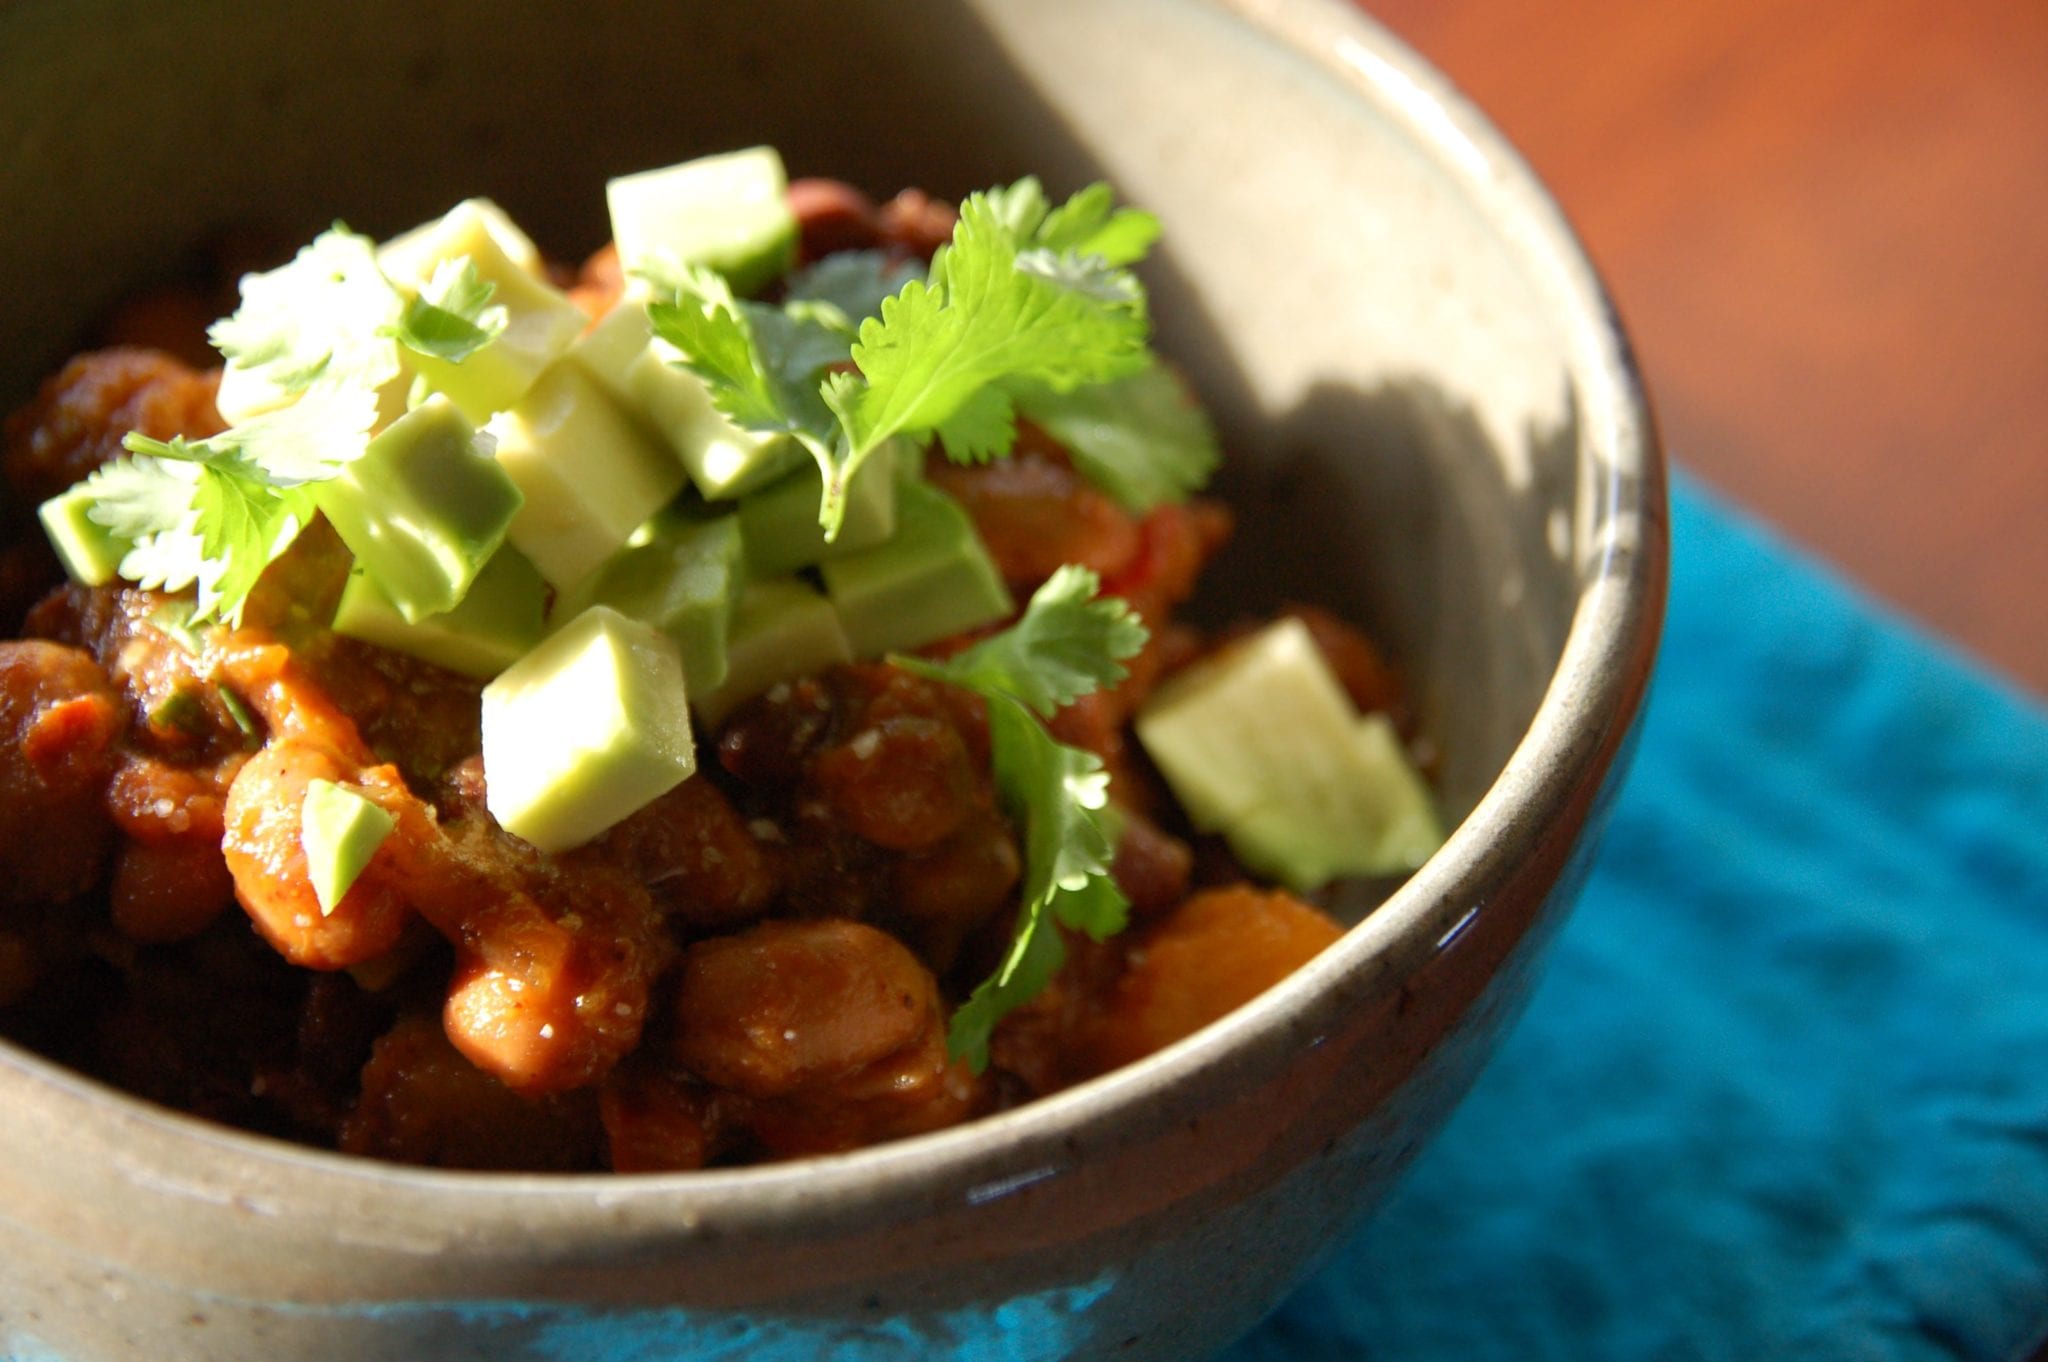 Re-claim Chipotle & Splurge: Take Your Winter Food Power Back (Recipes Included!)